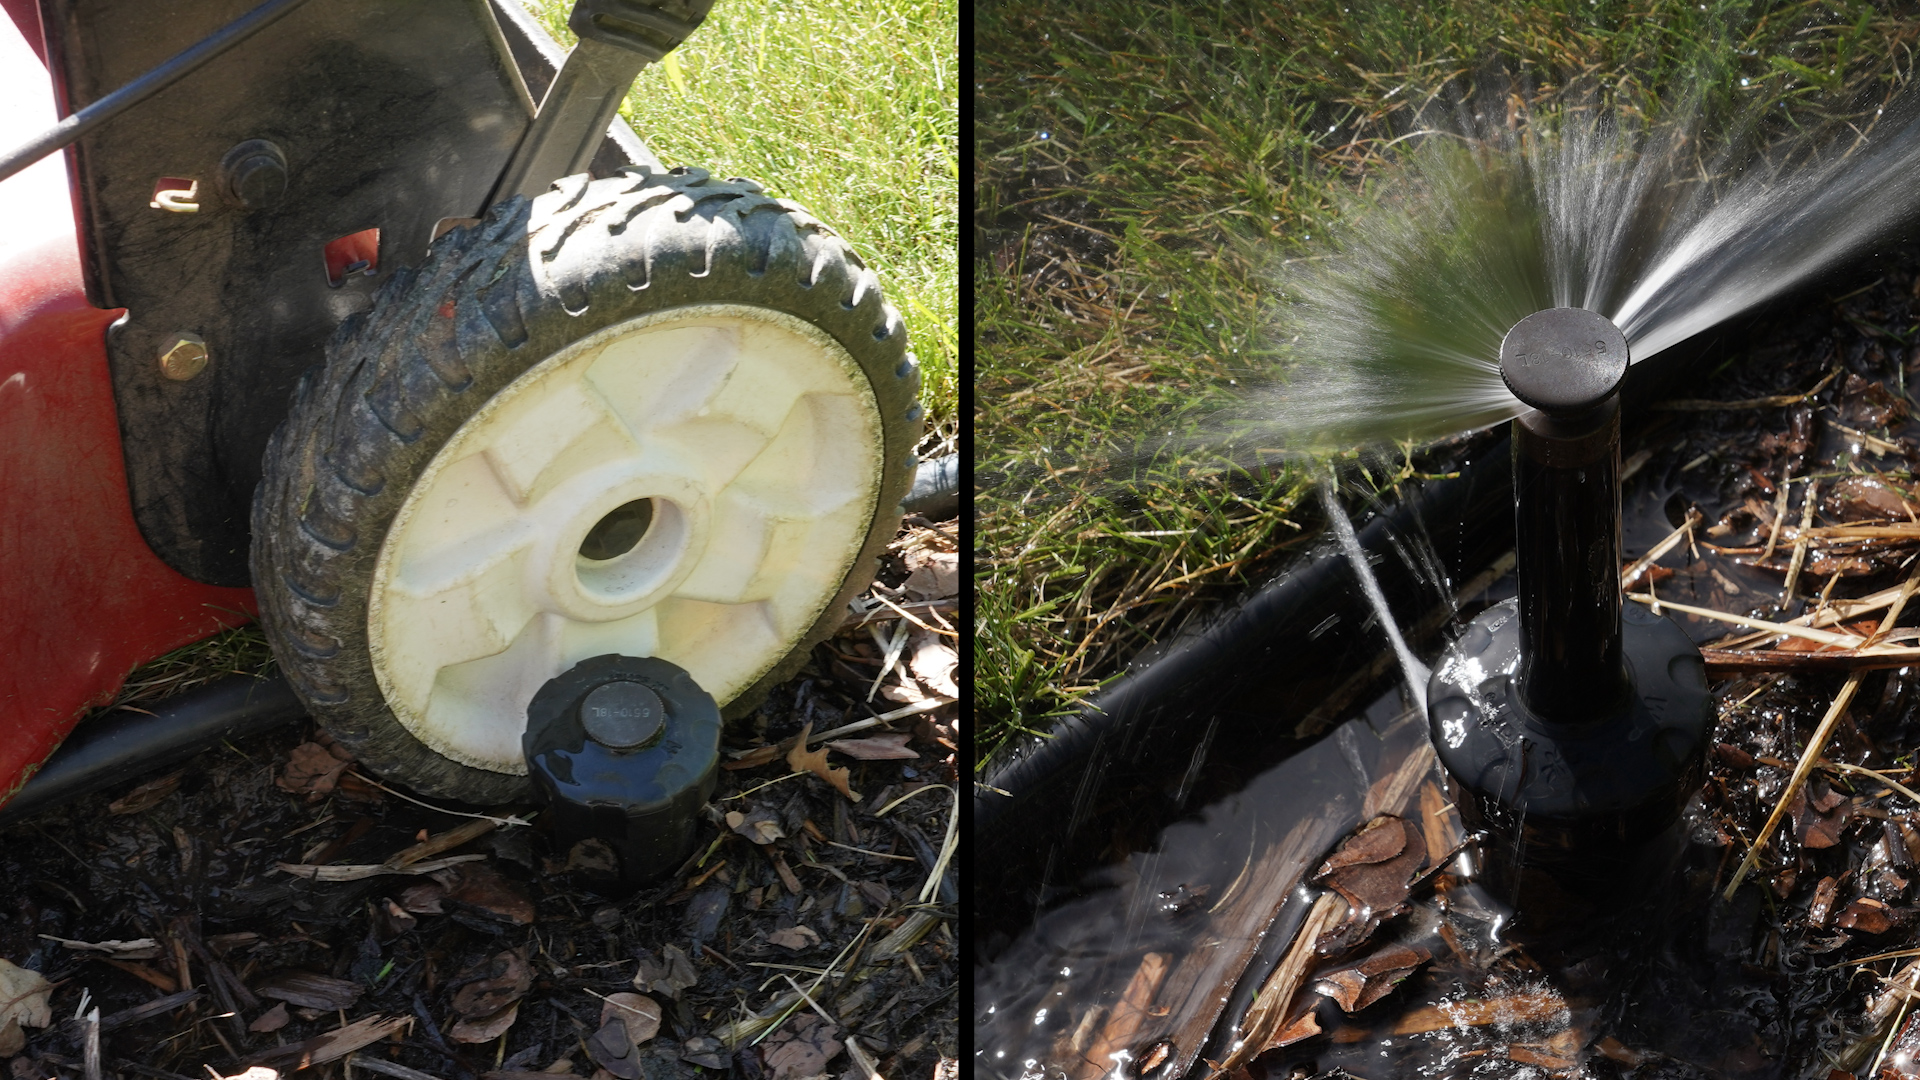 Note the leak on the sprinkler after it's hit by a lawnmower. Photo credit: Denver Water.